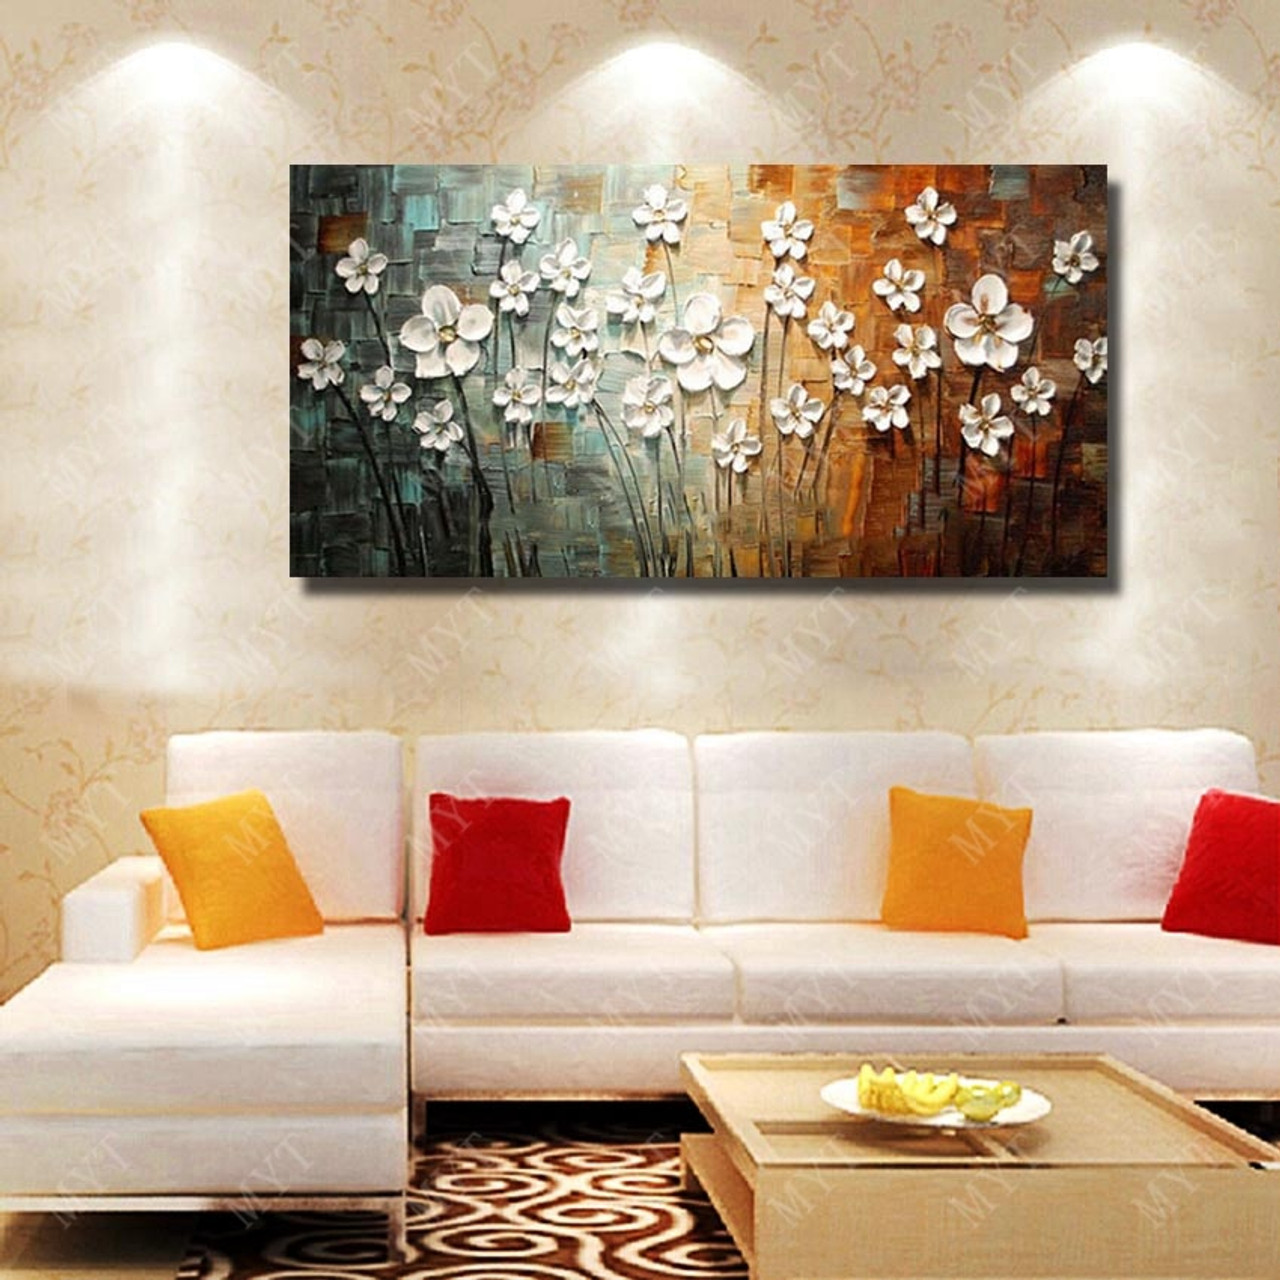 Chinese Wall Art Modern Living Room Wall Decor Flower Painting Large Canvas Art Hand Painted Wall  41619.1544597880 ?c=2?imbypass=on